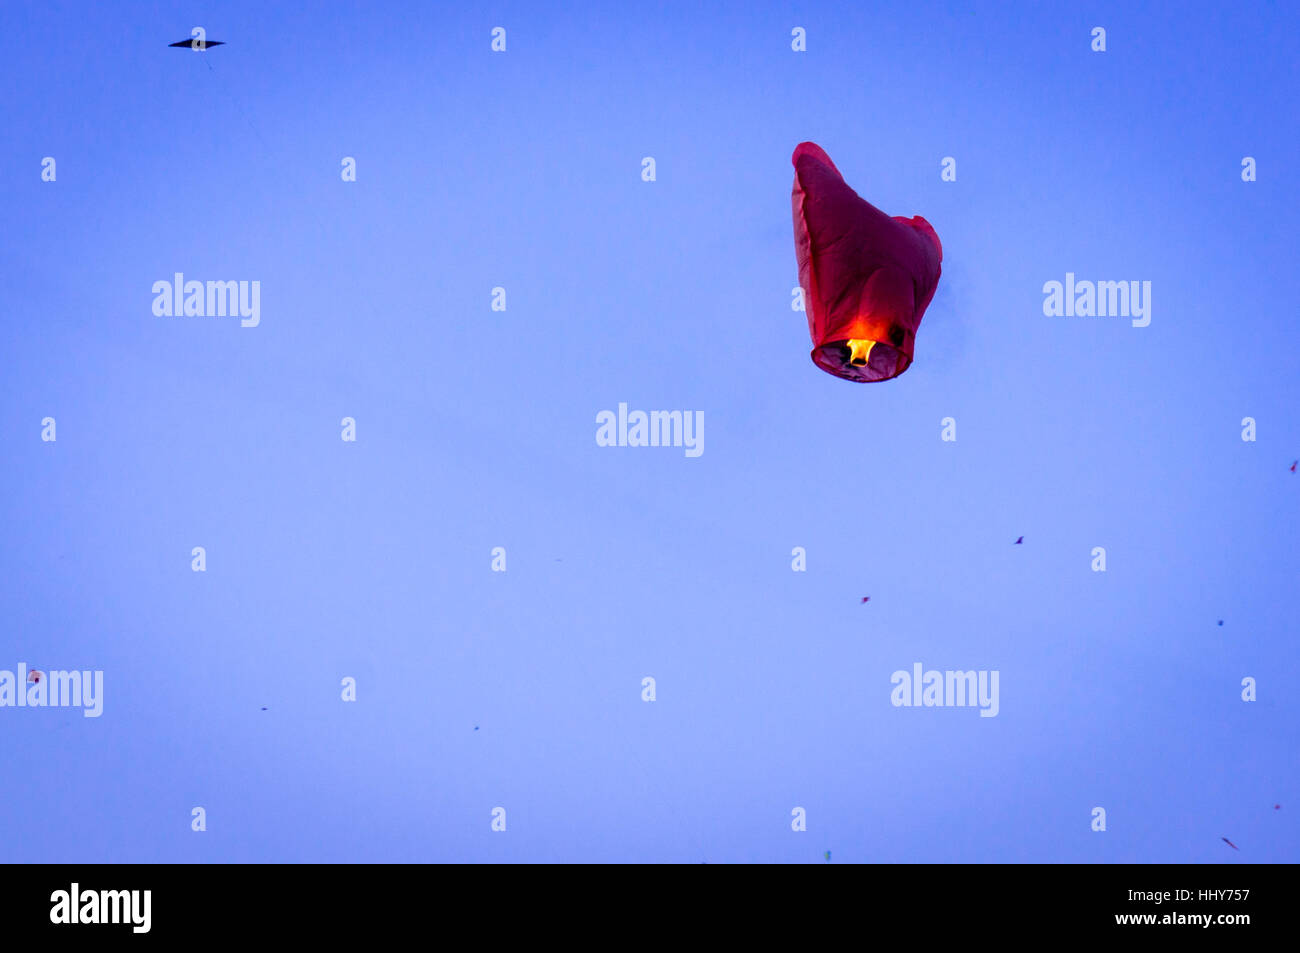 Chinese lantern floats against a blue sky with kites flying against it during the festival of Makar Sankranti in Jaipur India Stock Photo